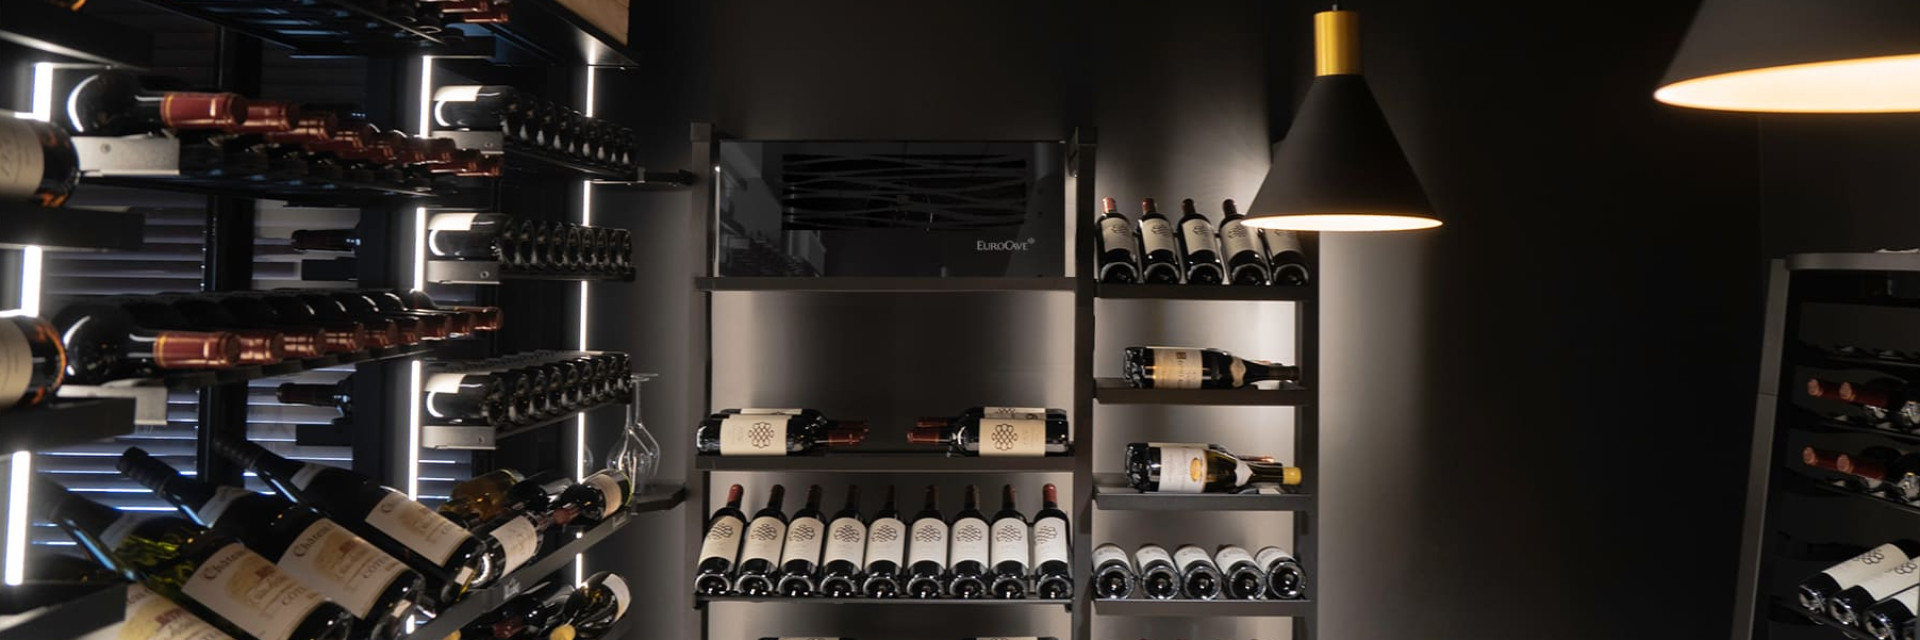 Wine cellar air conditioning - Stable temperature and humidity - Create a perfect wine room for storing and aging wine.